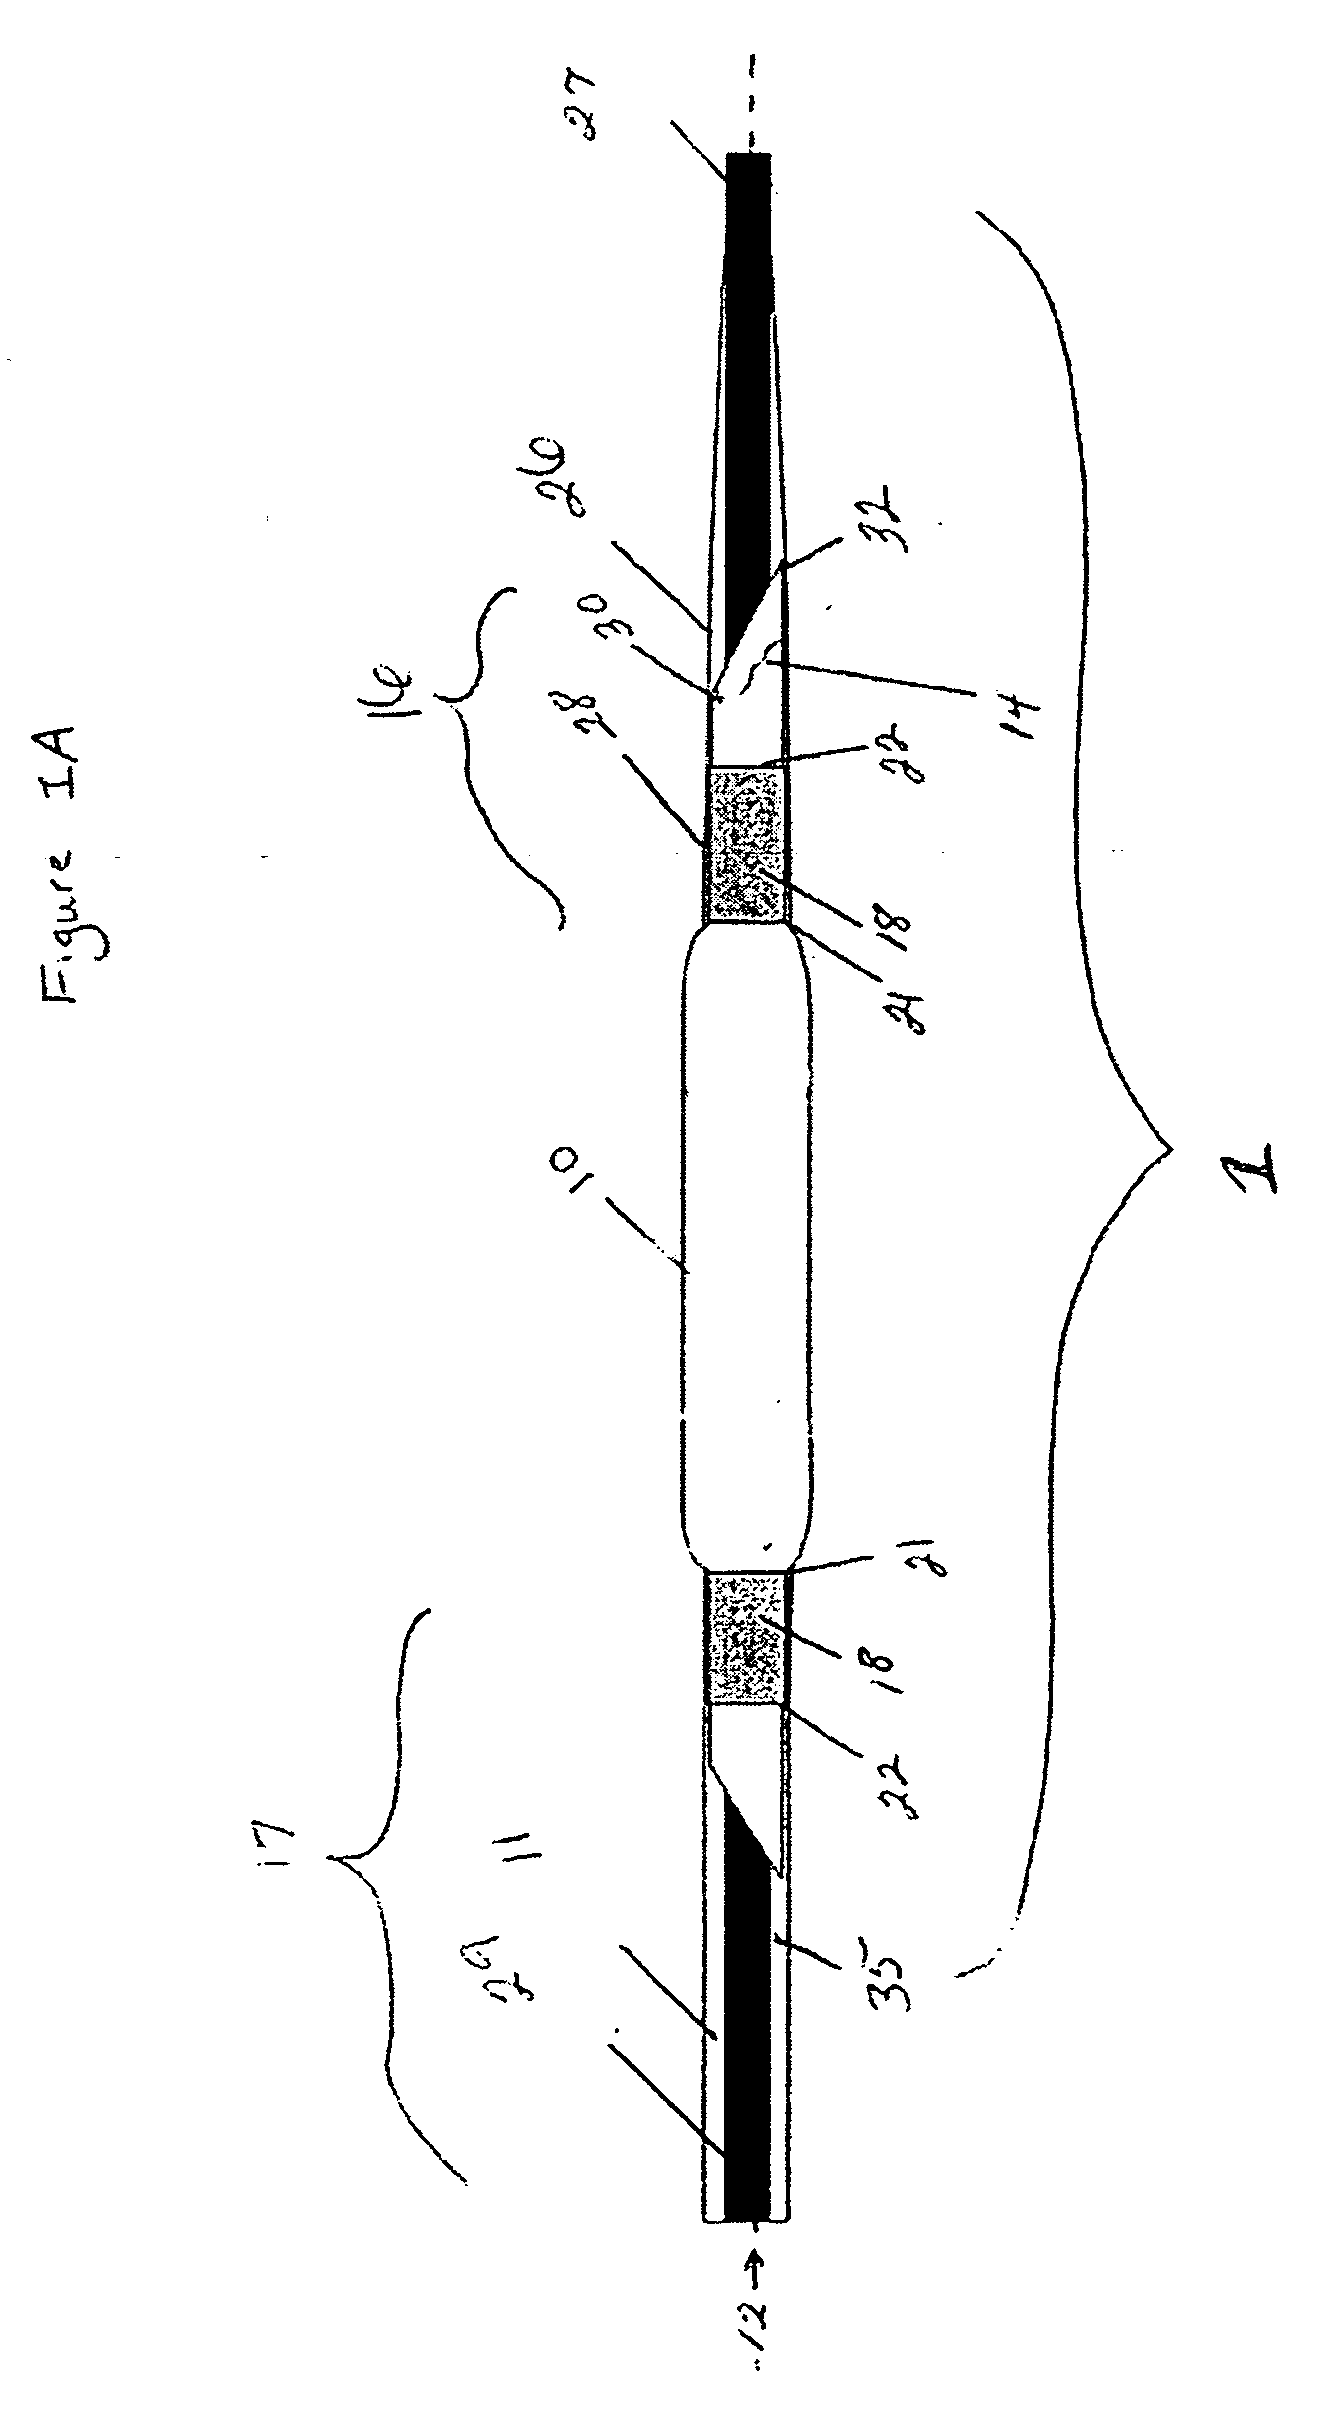 Controlled release mechanism for balloon catheters